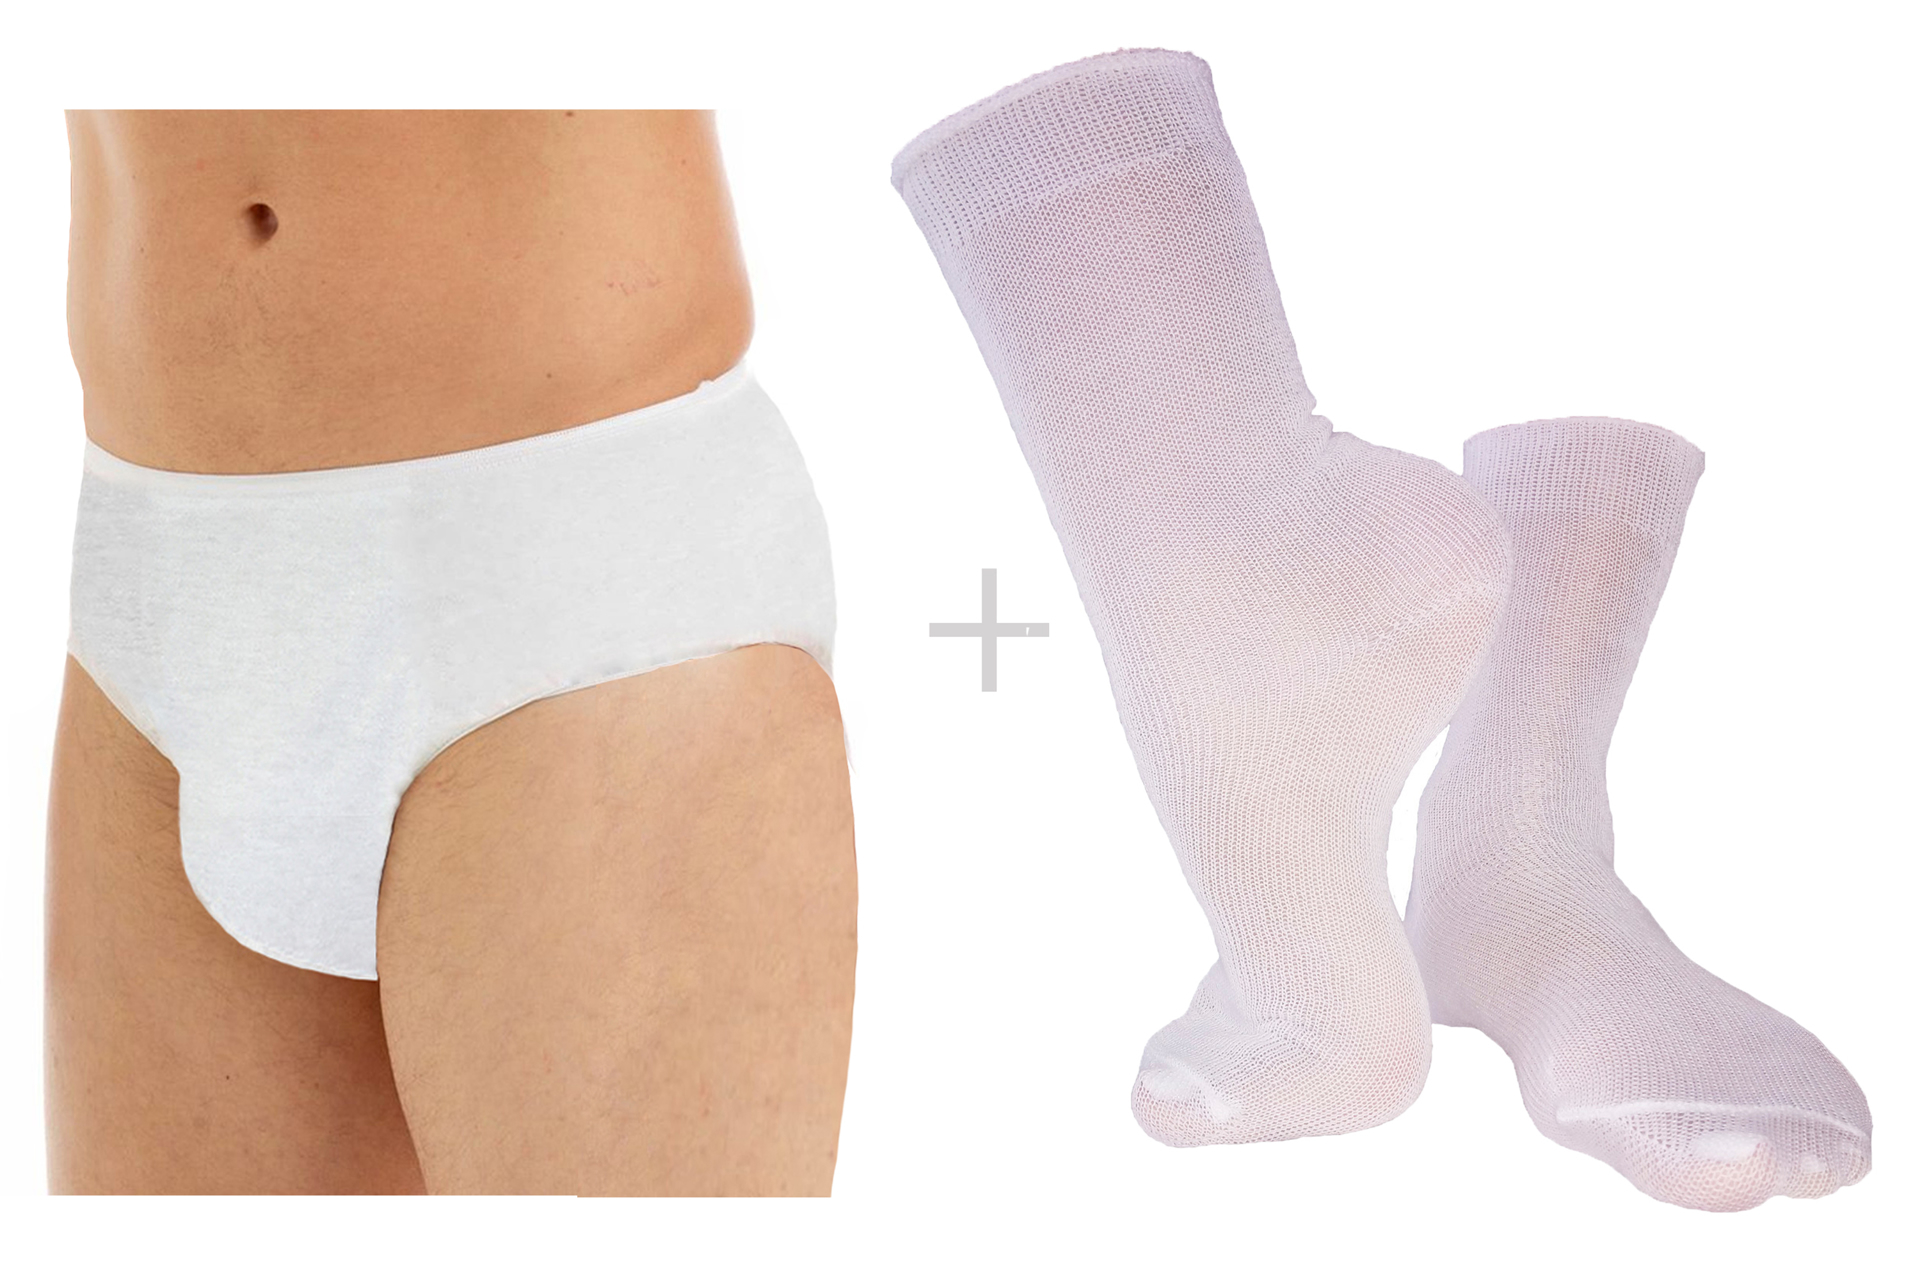 https://www.underworks.com/images/thumbs/0002046_underworks-combo-mens-briefs-and-crew-socks-10-pack-of-mens-disposable-100-cotton-underwear-and-10-p.jpeg